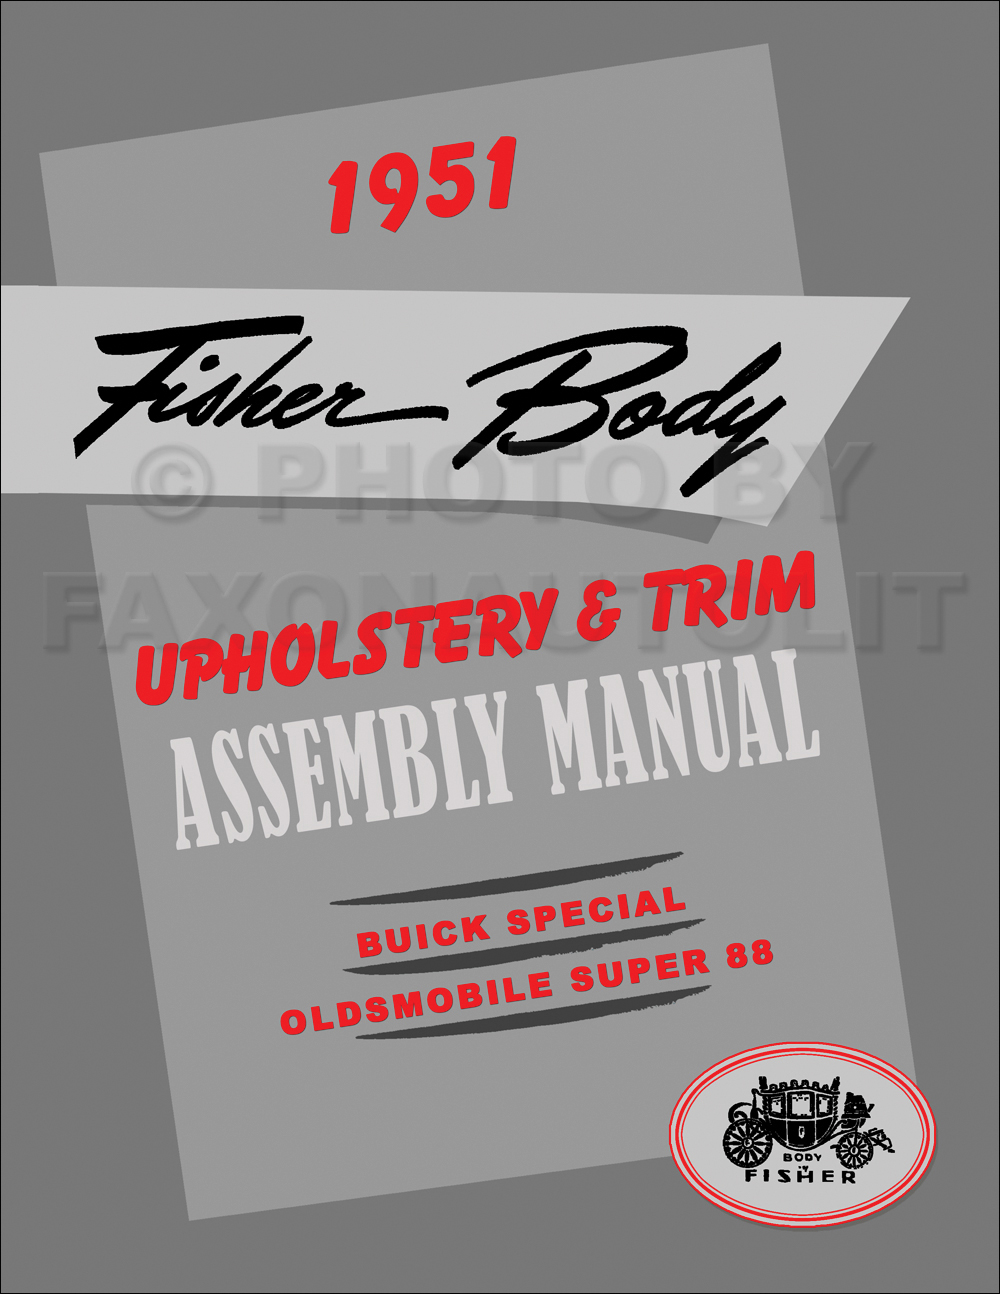 1951 Fisher Body Upholstery Assembly Manual Reprint Buick Special Olds Super 88